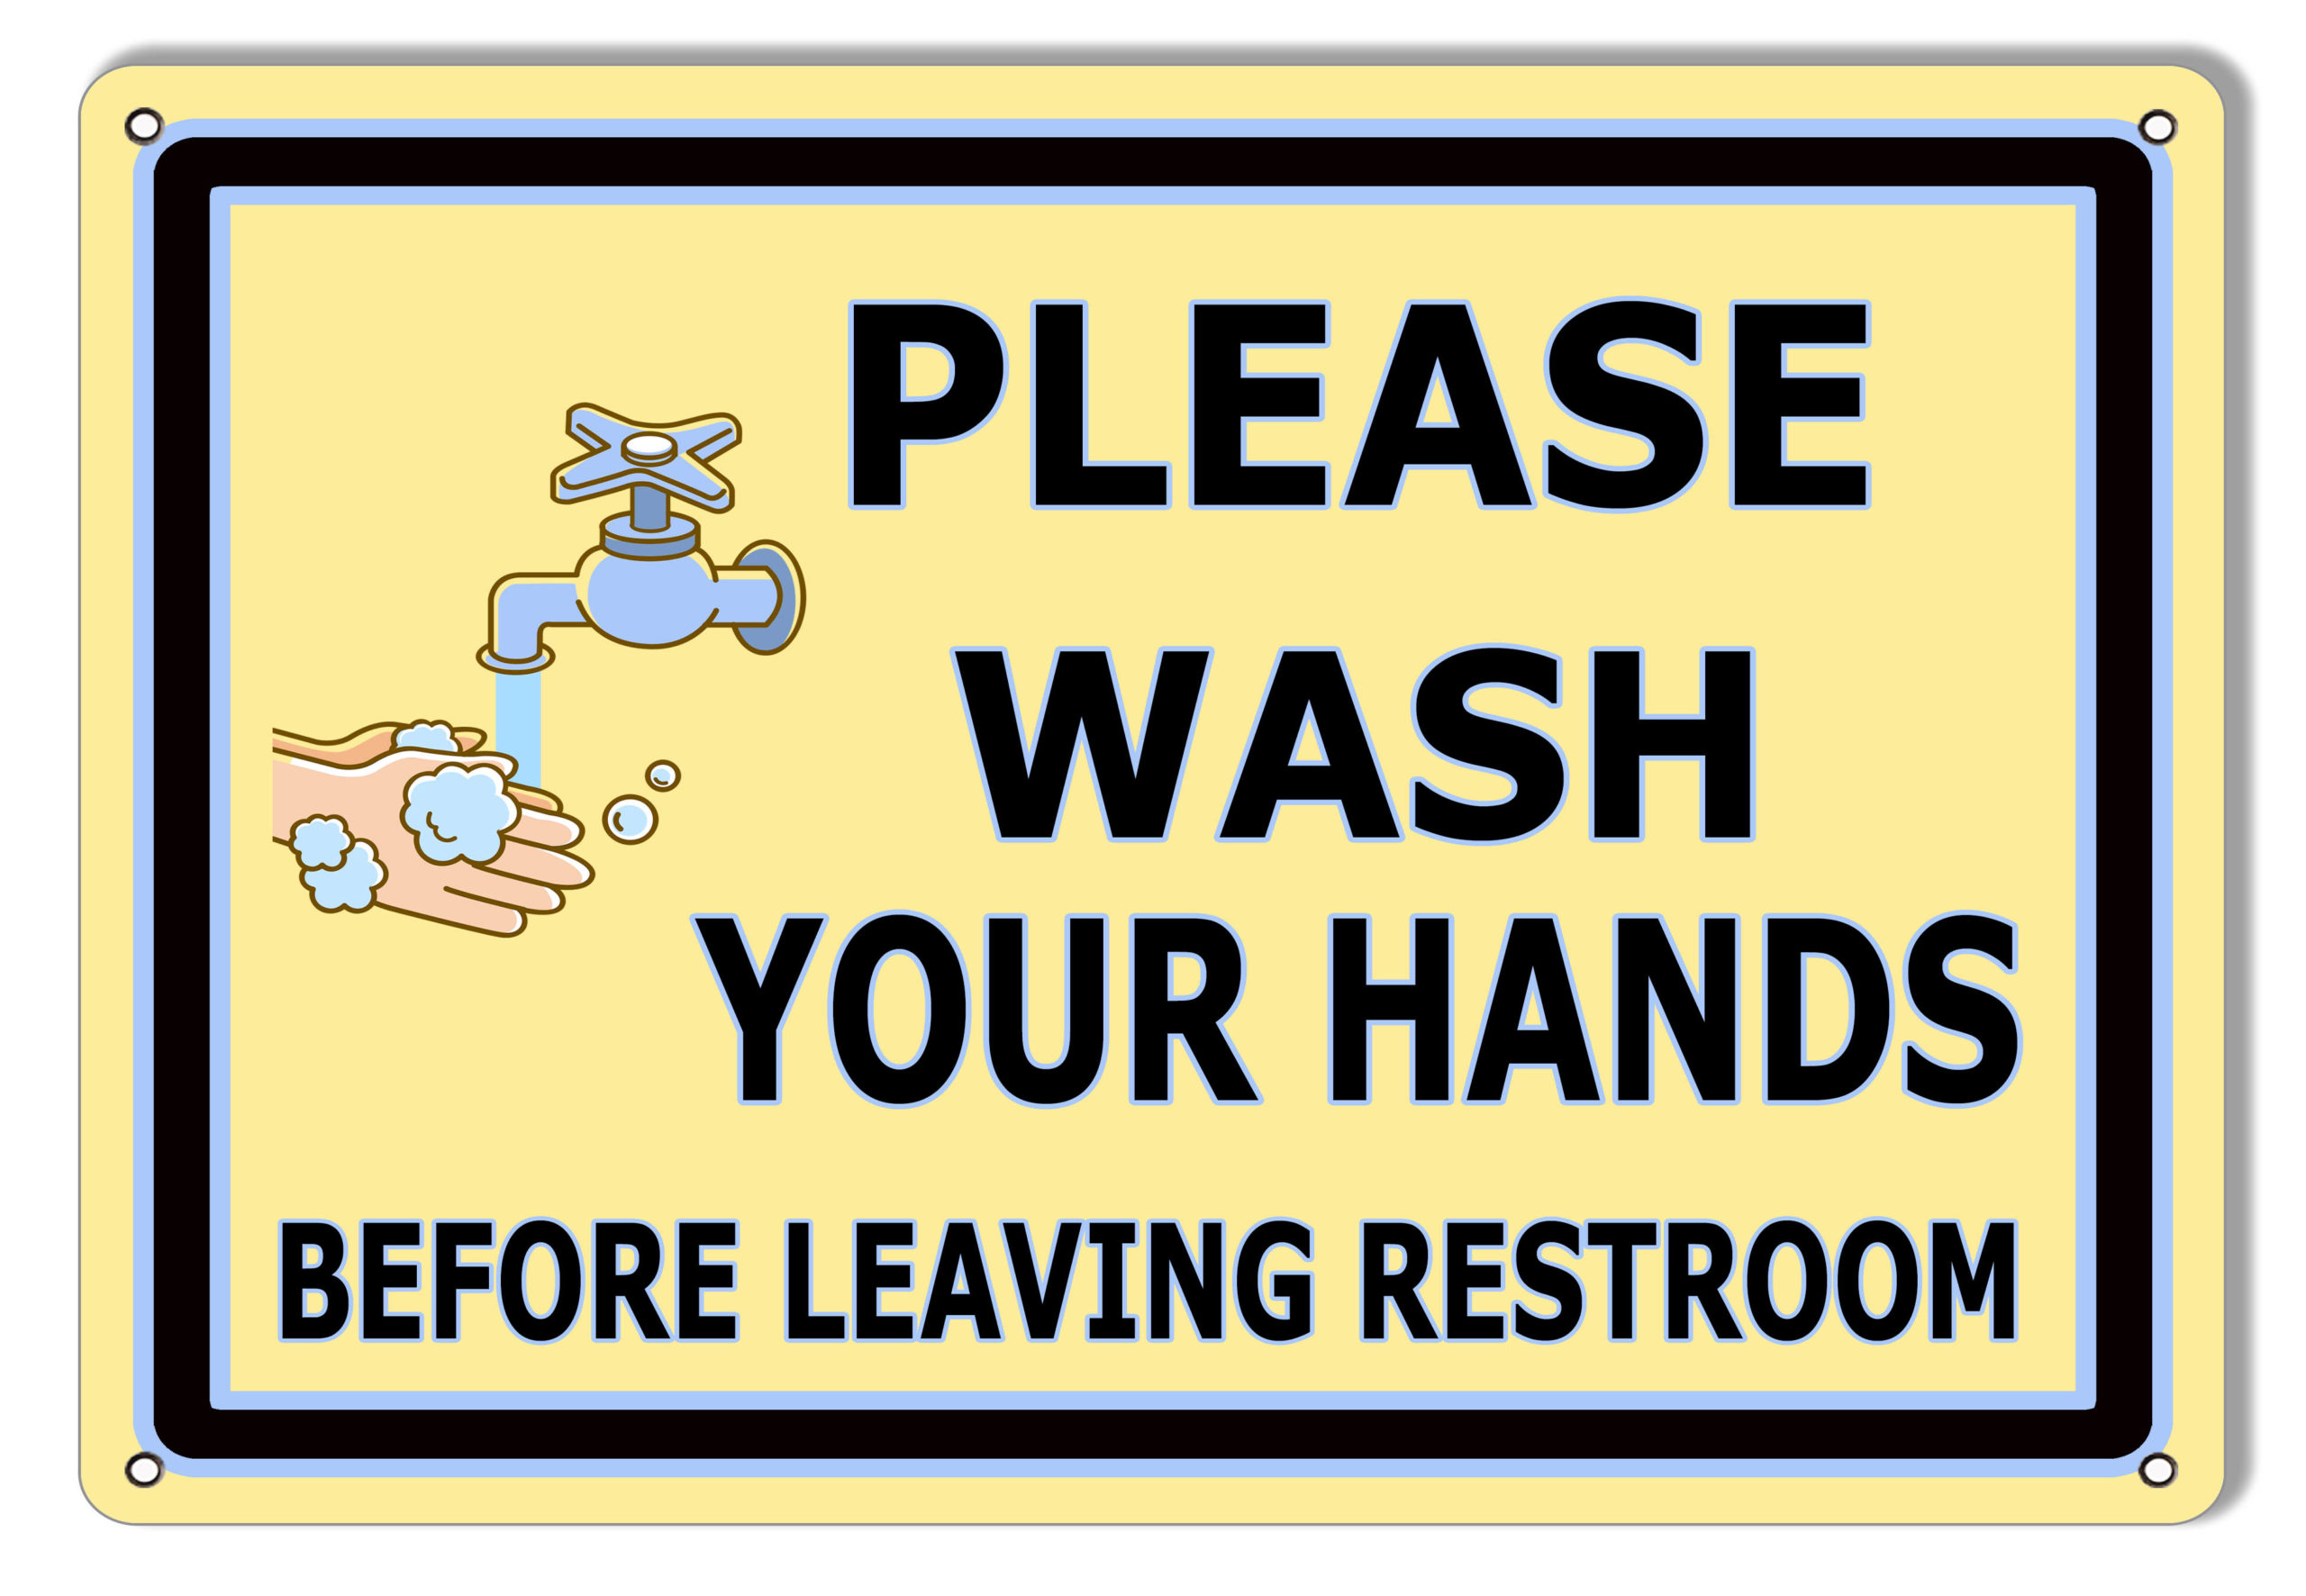 Please Wash Your Hands Restroom Metal Sign 9x12 - Reproduction Vintage